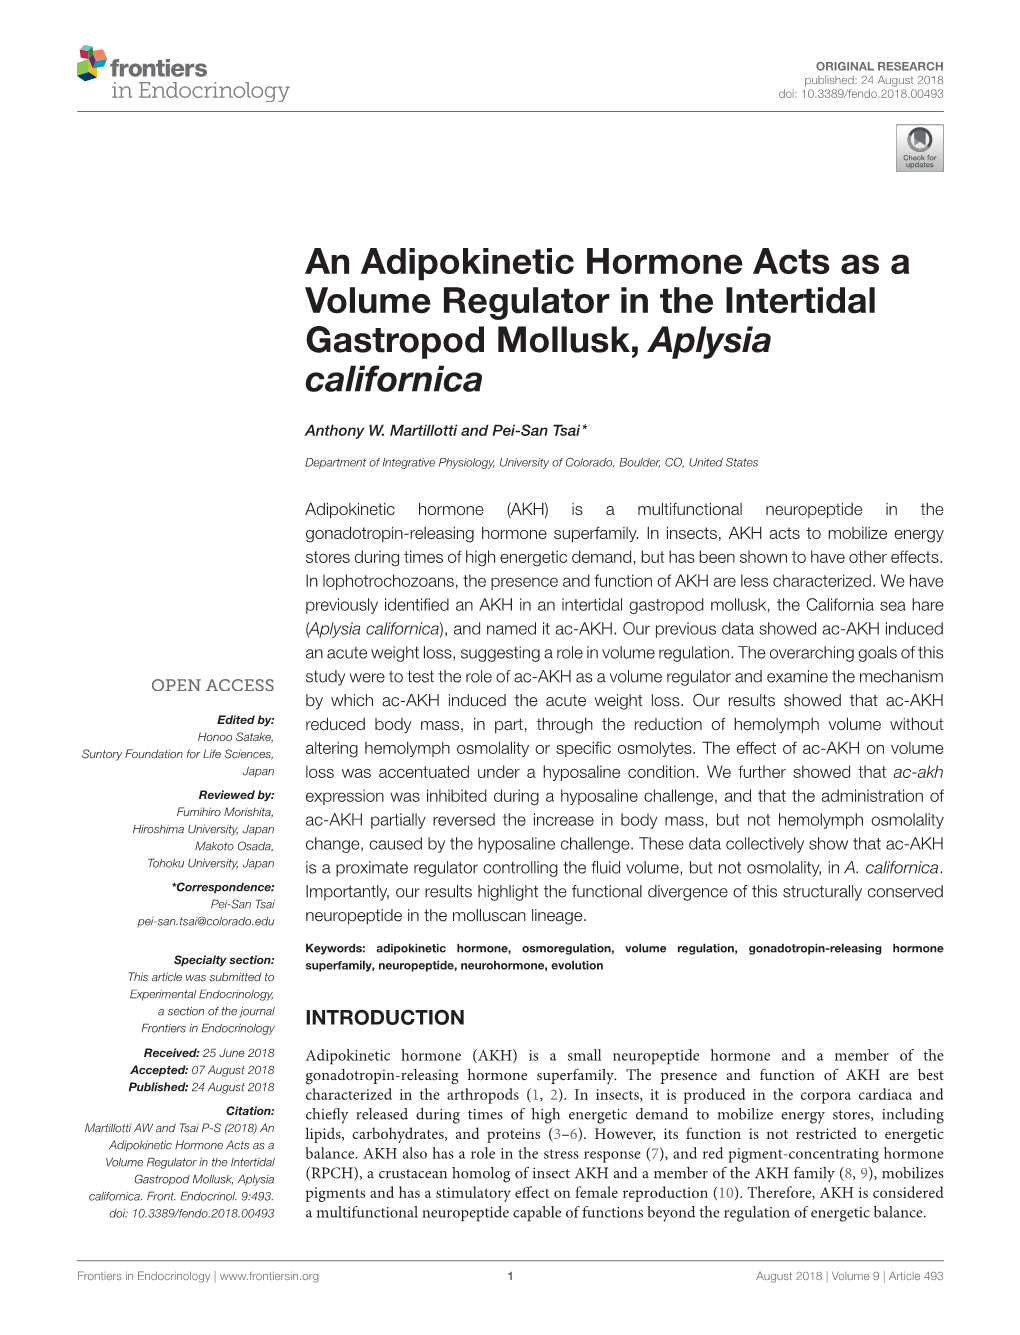 An Adipokinetic Hormone Acts As a Volume Regulator in the Intertidal Gastropod Mollusk, Aplysia Californica